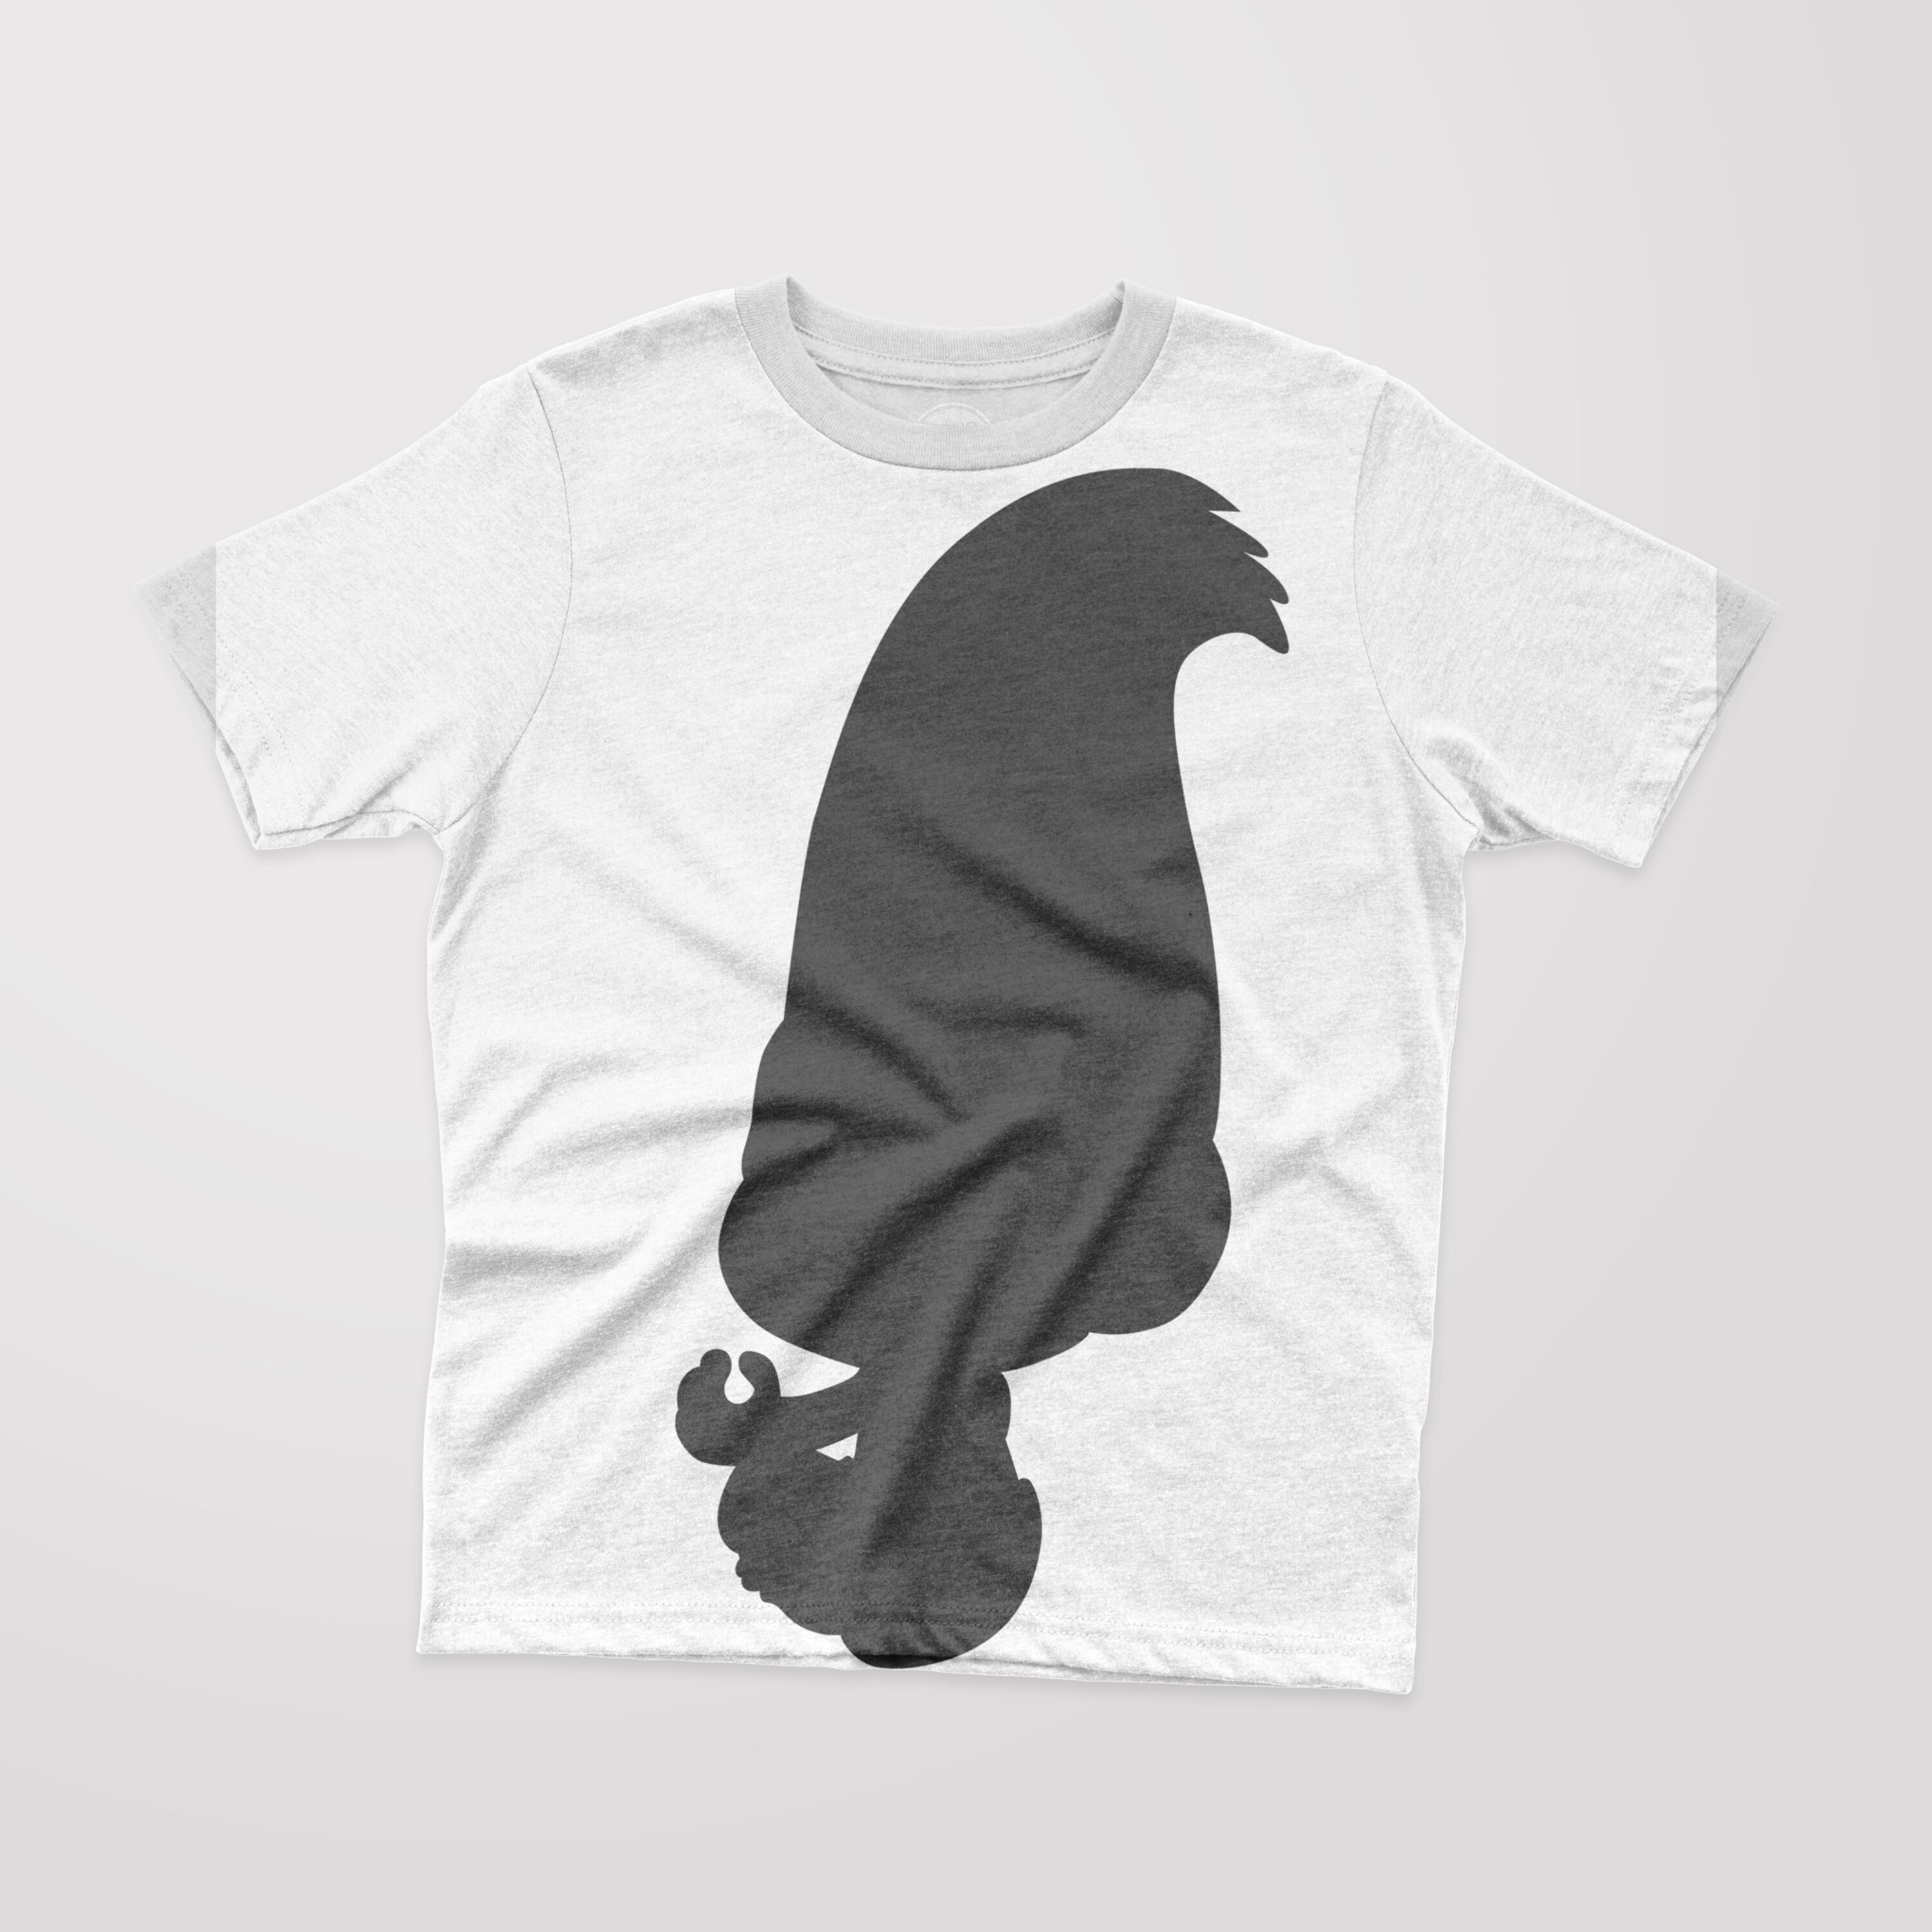 White T-shirt with a black silhouette of a cartoon character - Creek.